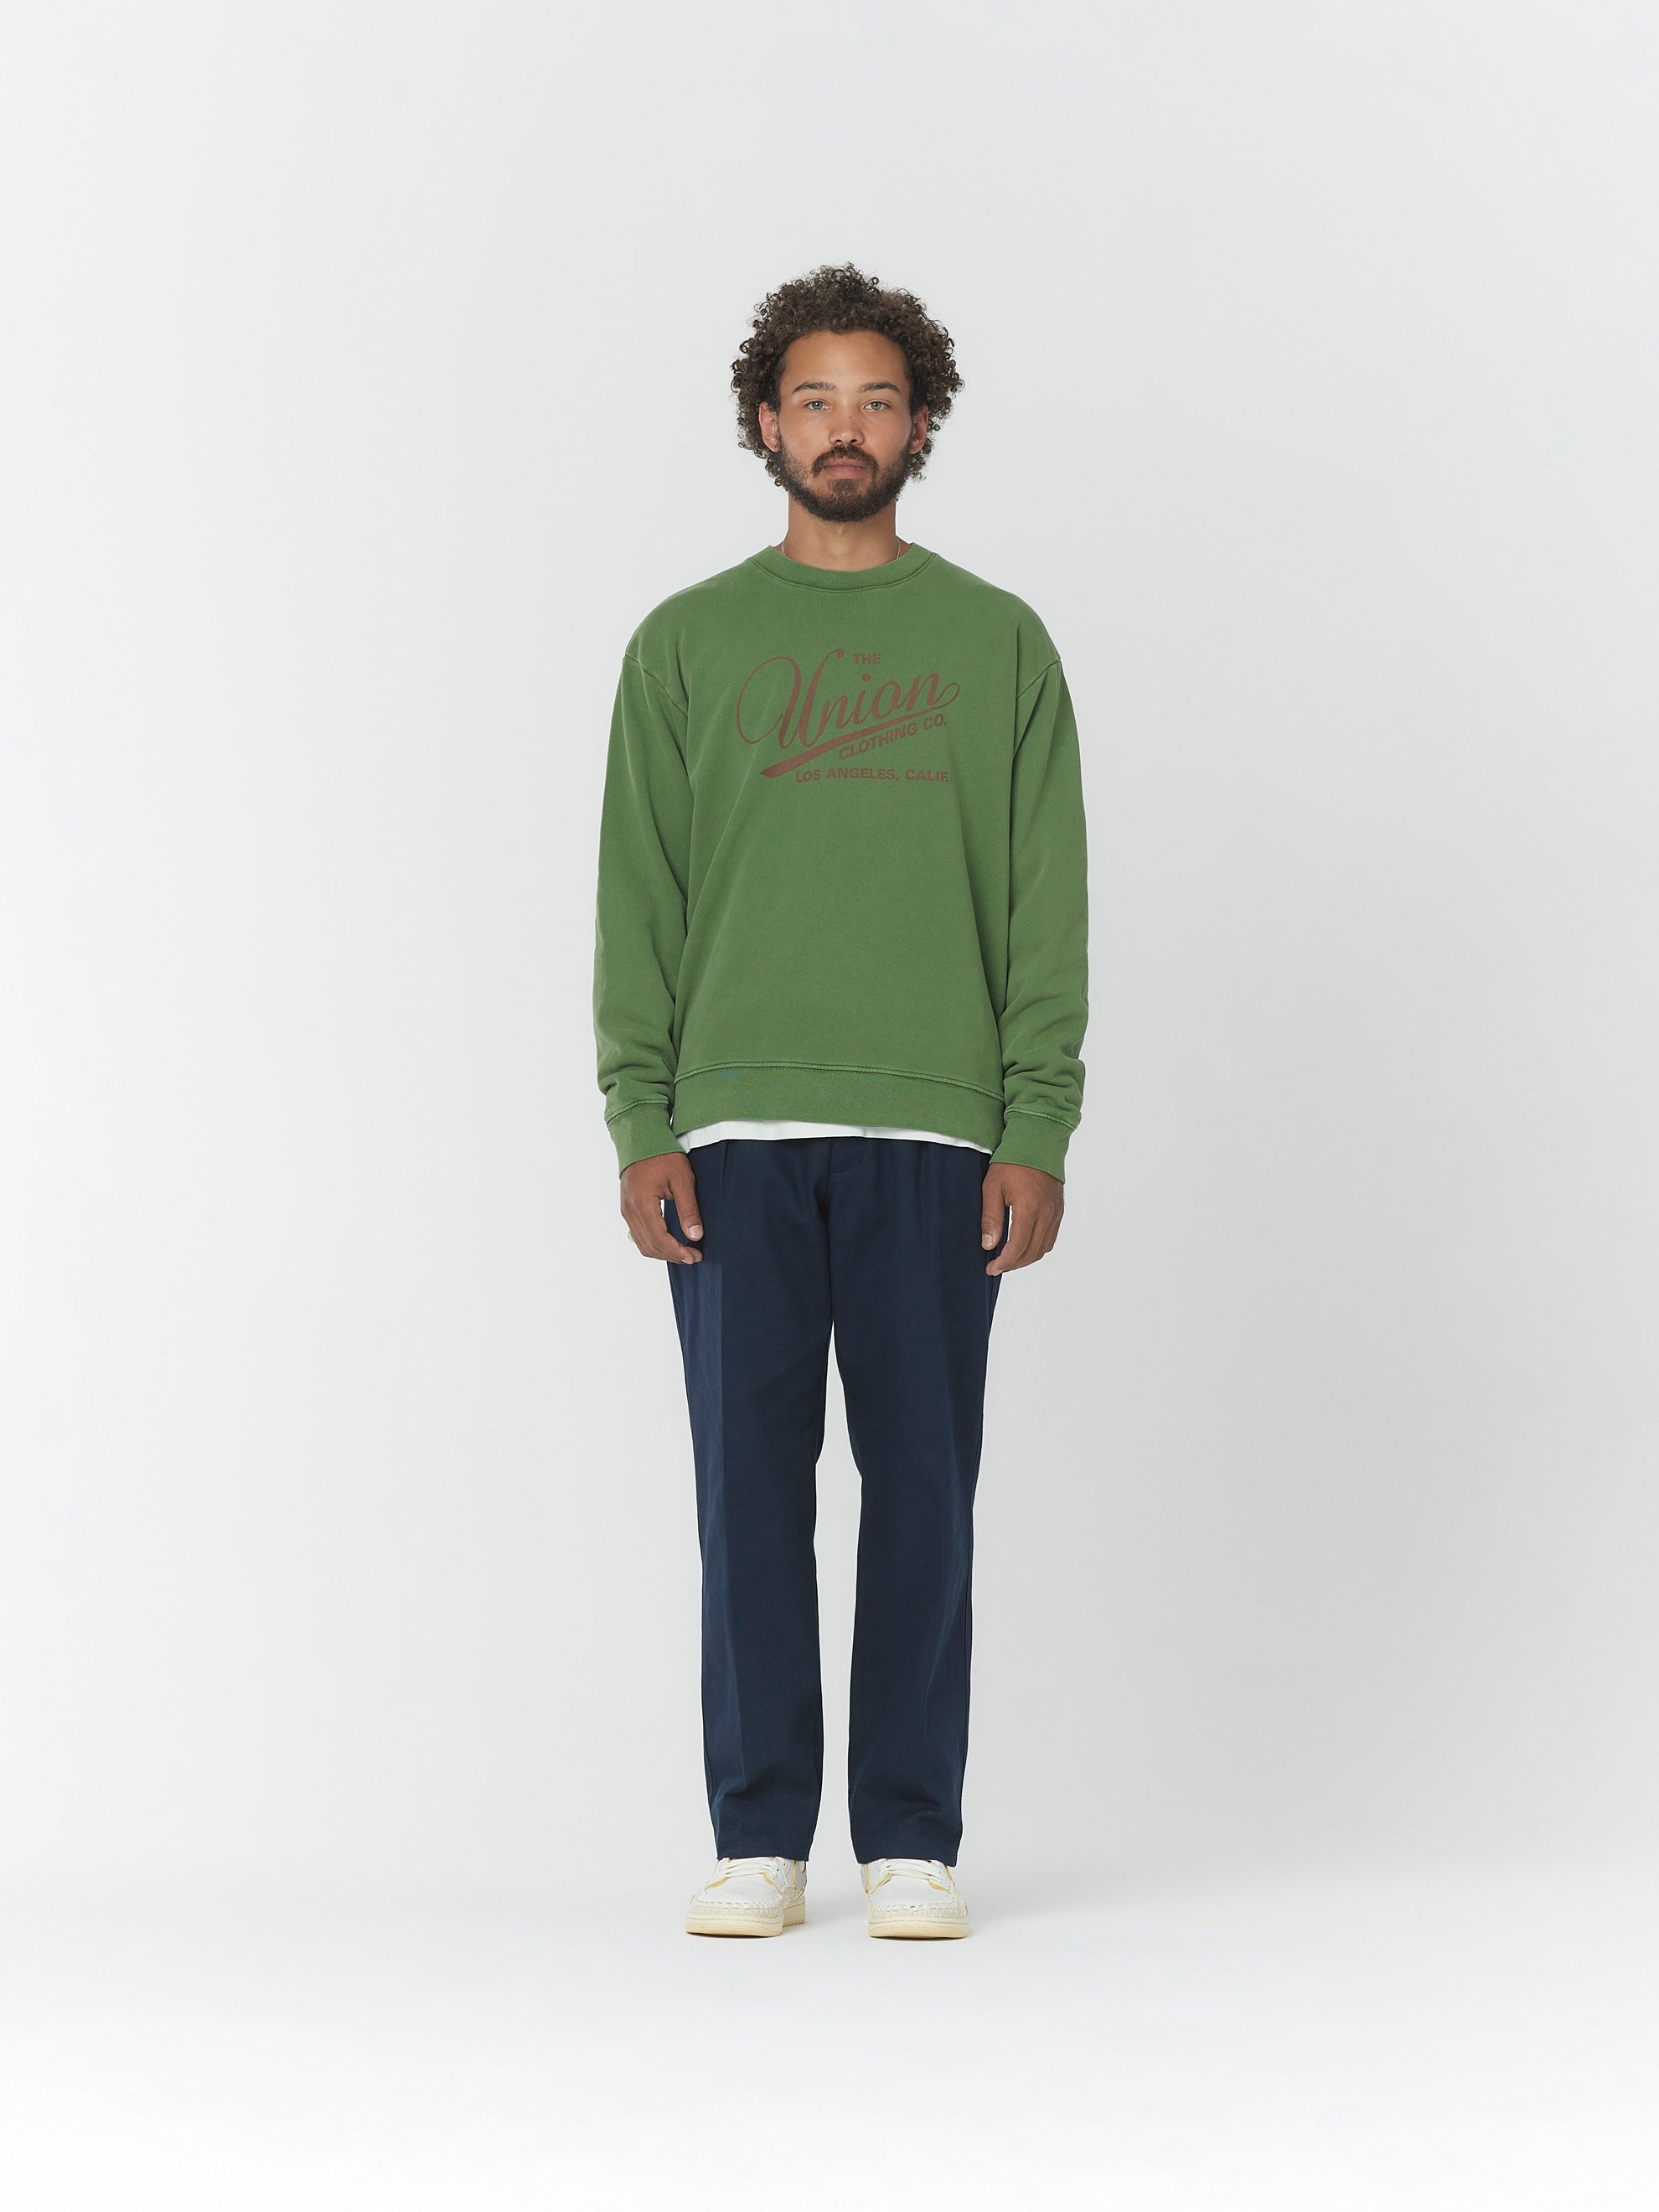 Clothing Co. Crewneck (Forest)